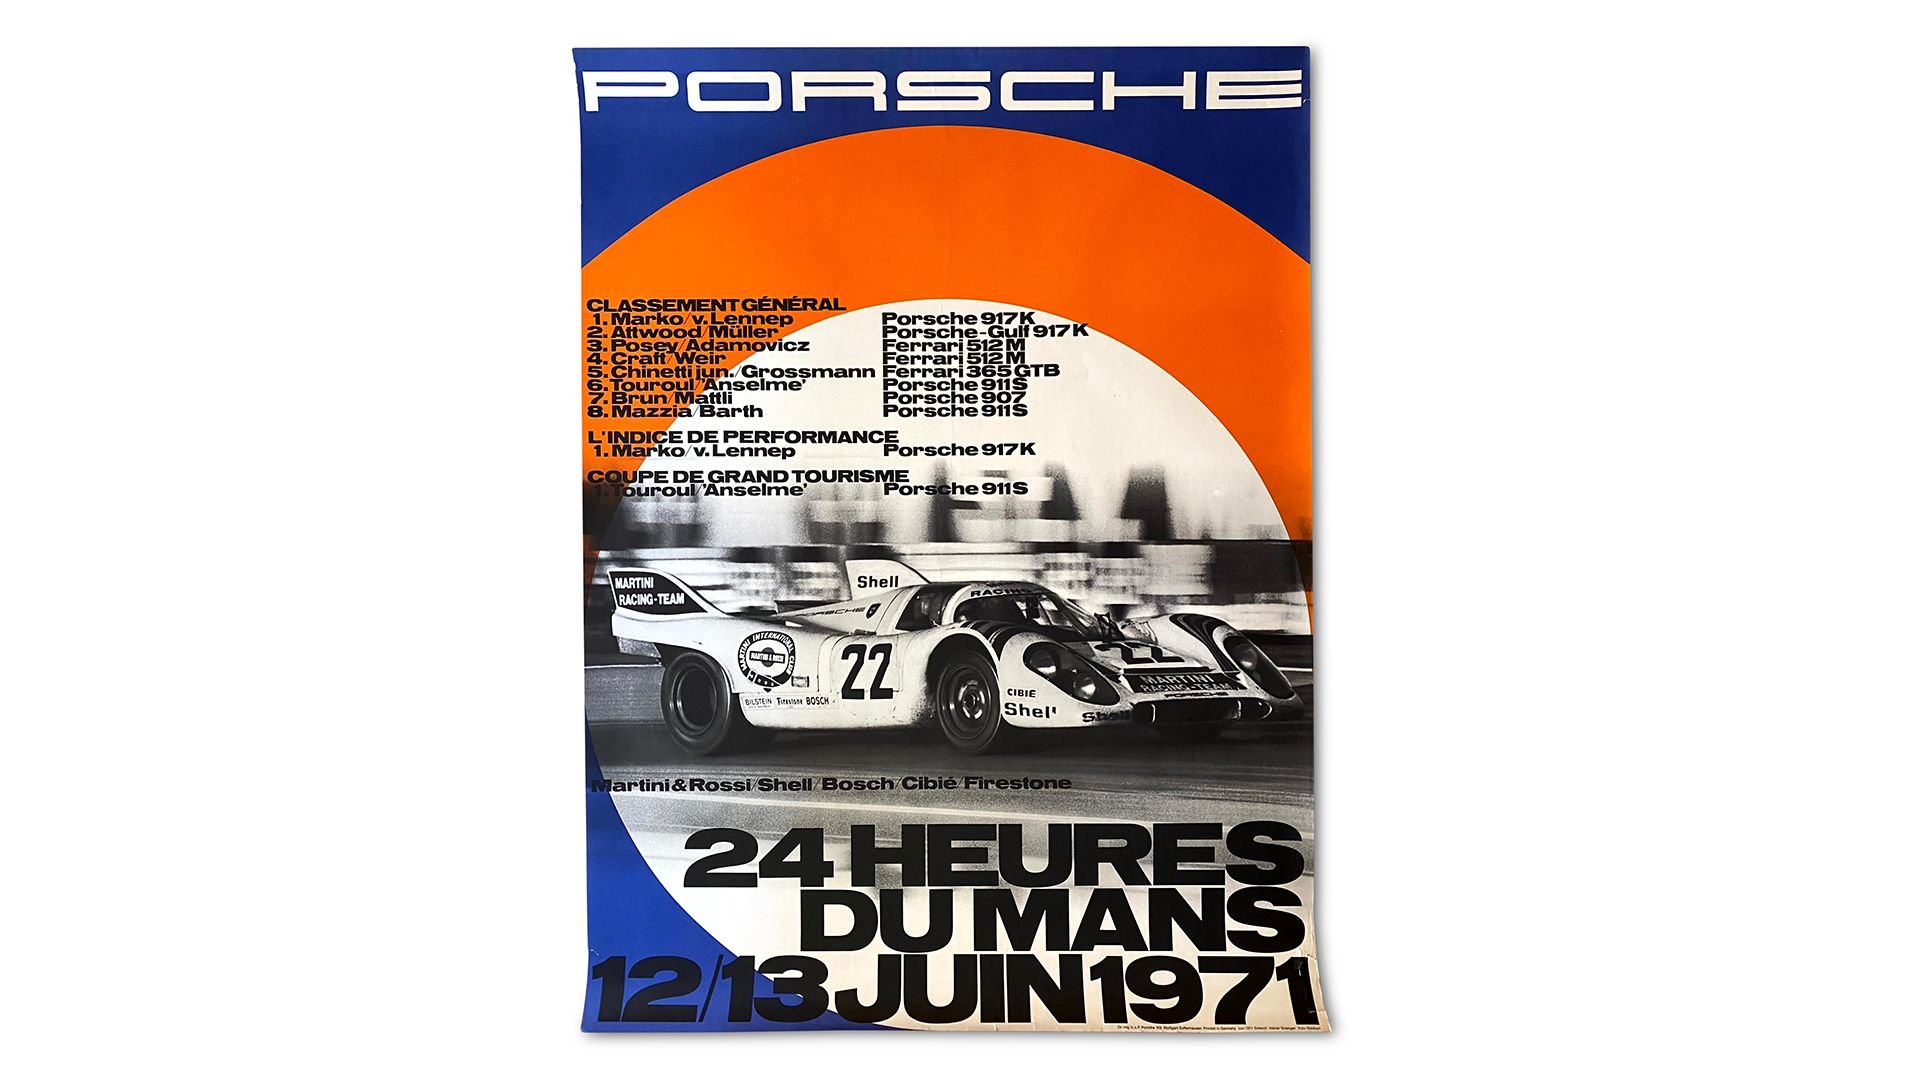 For Sale Group of 13 Porsche Sports Racing Prototype 917 Factory Racing Posters 1969-1971